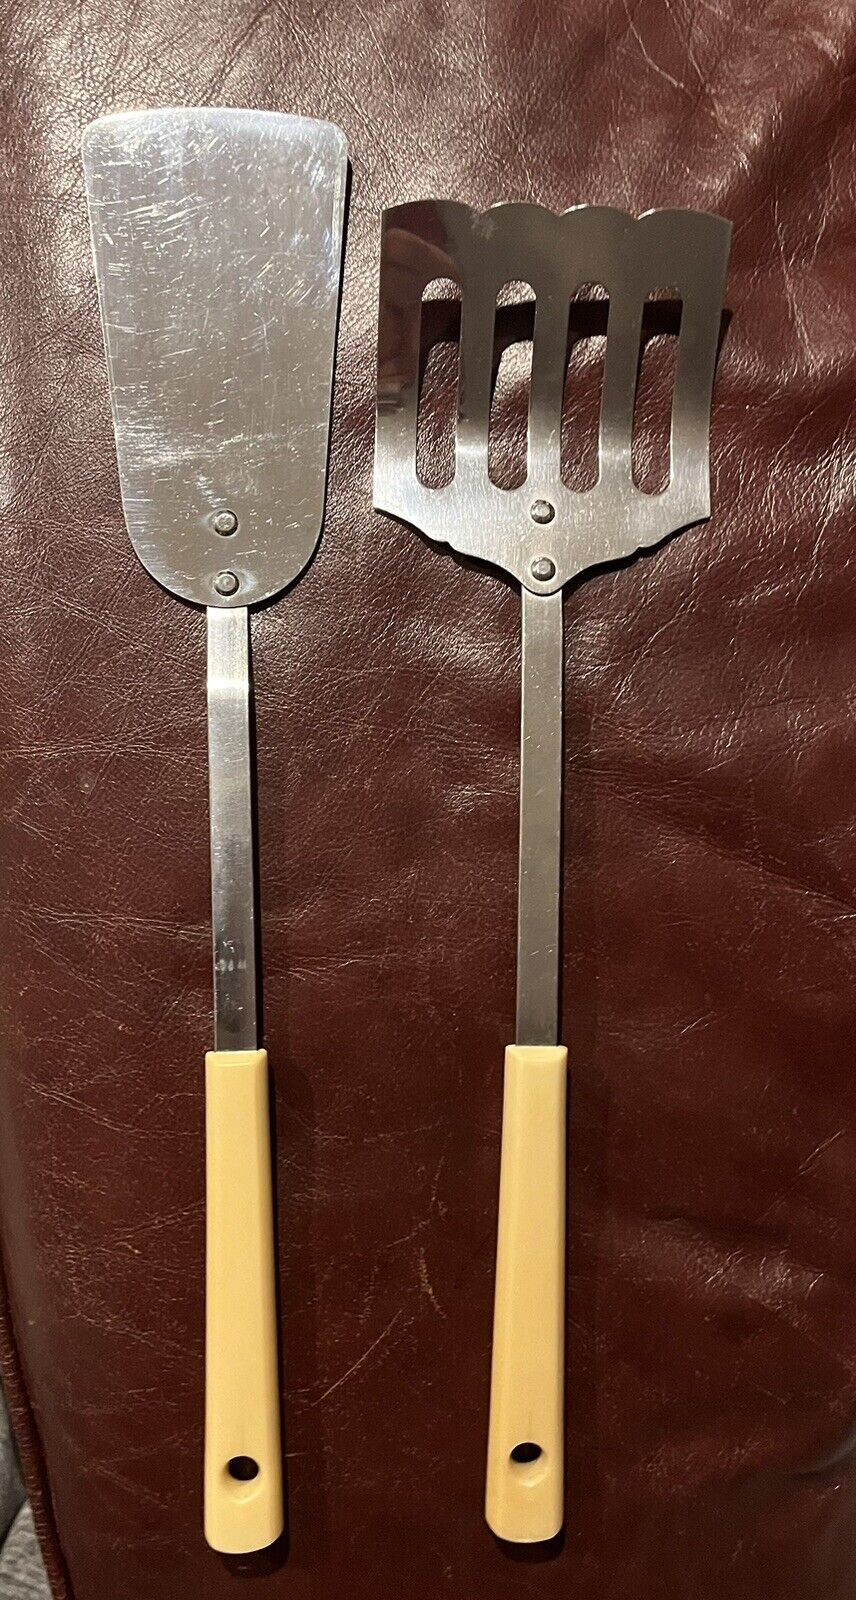 2-Vintage ROYAL BRAND Sharp Cutter Stainless Steel Spatulas, 1 is Angled Slotted